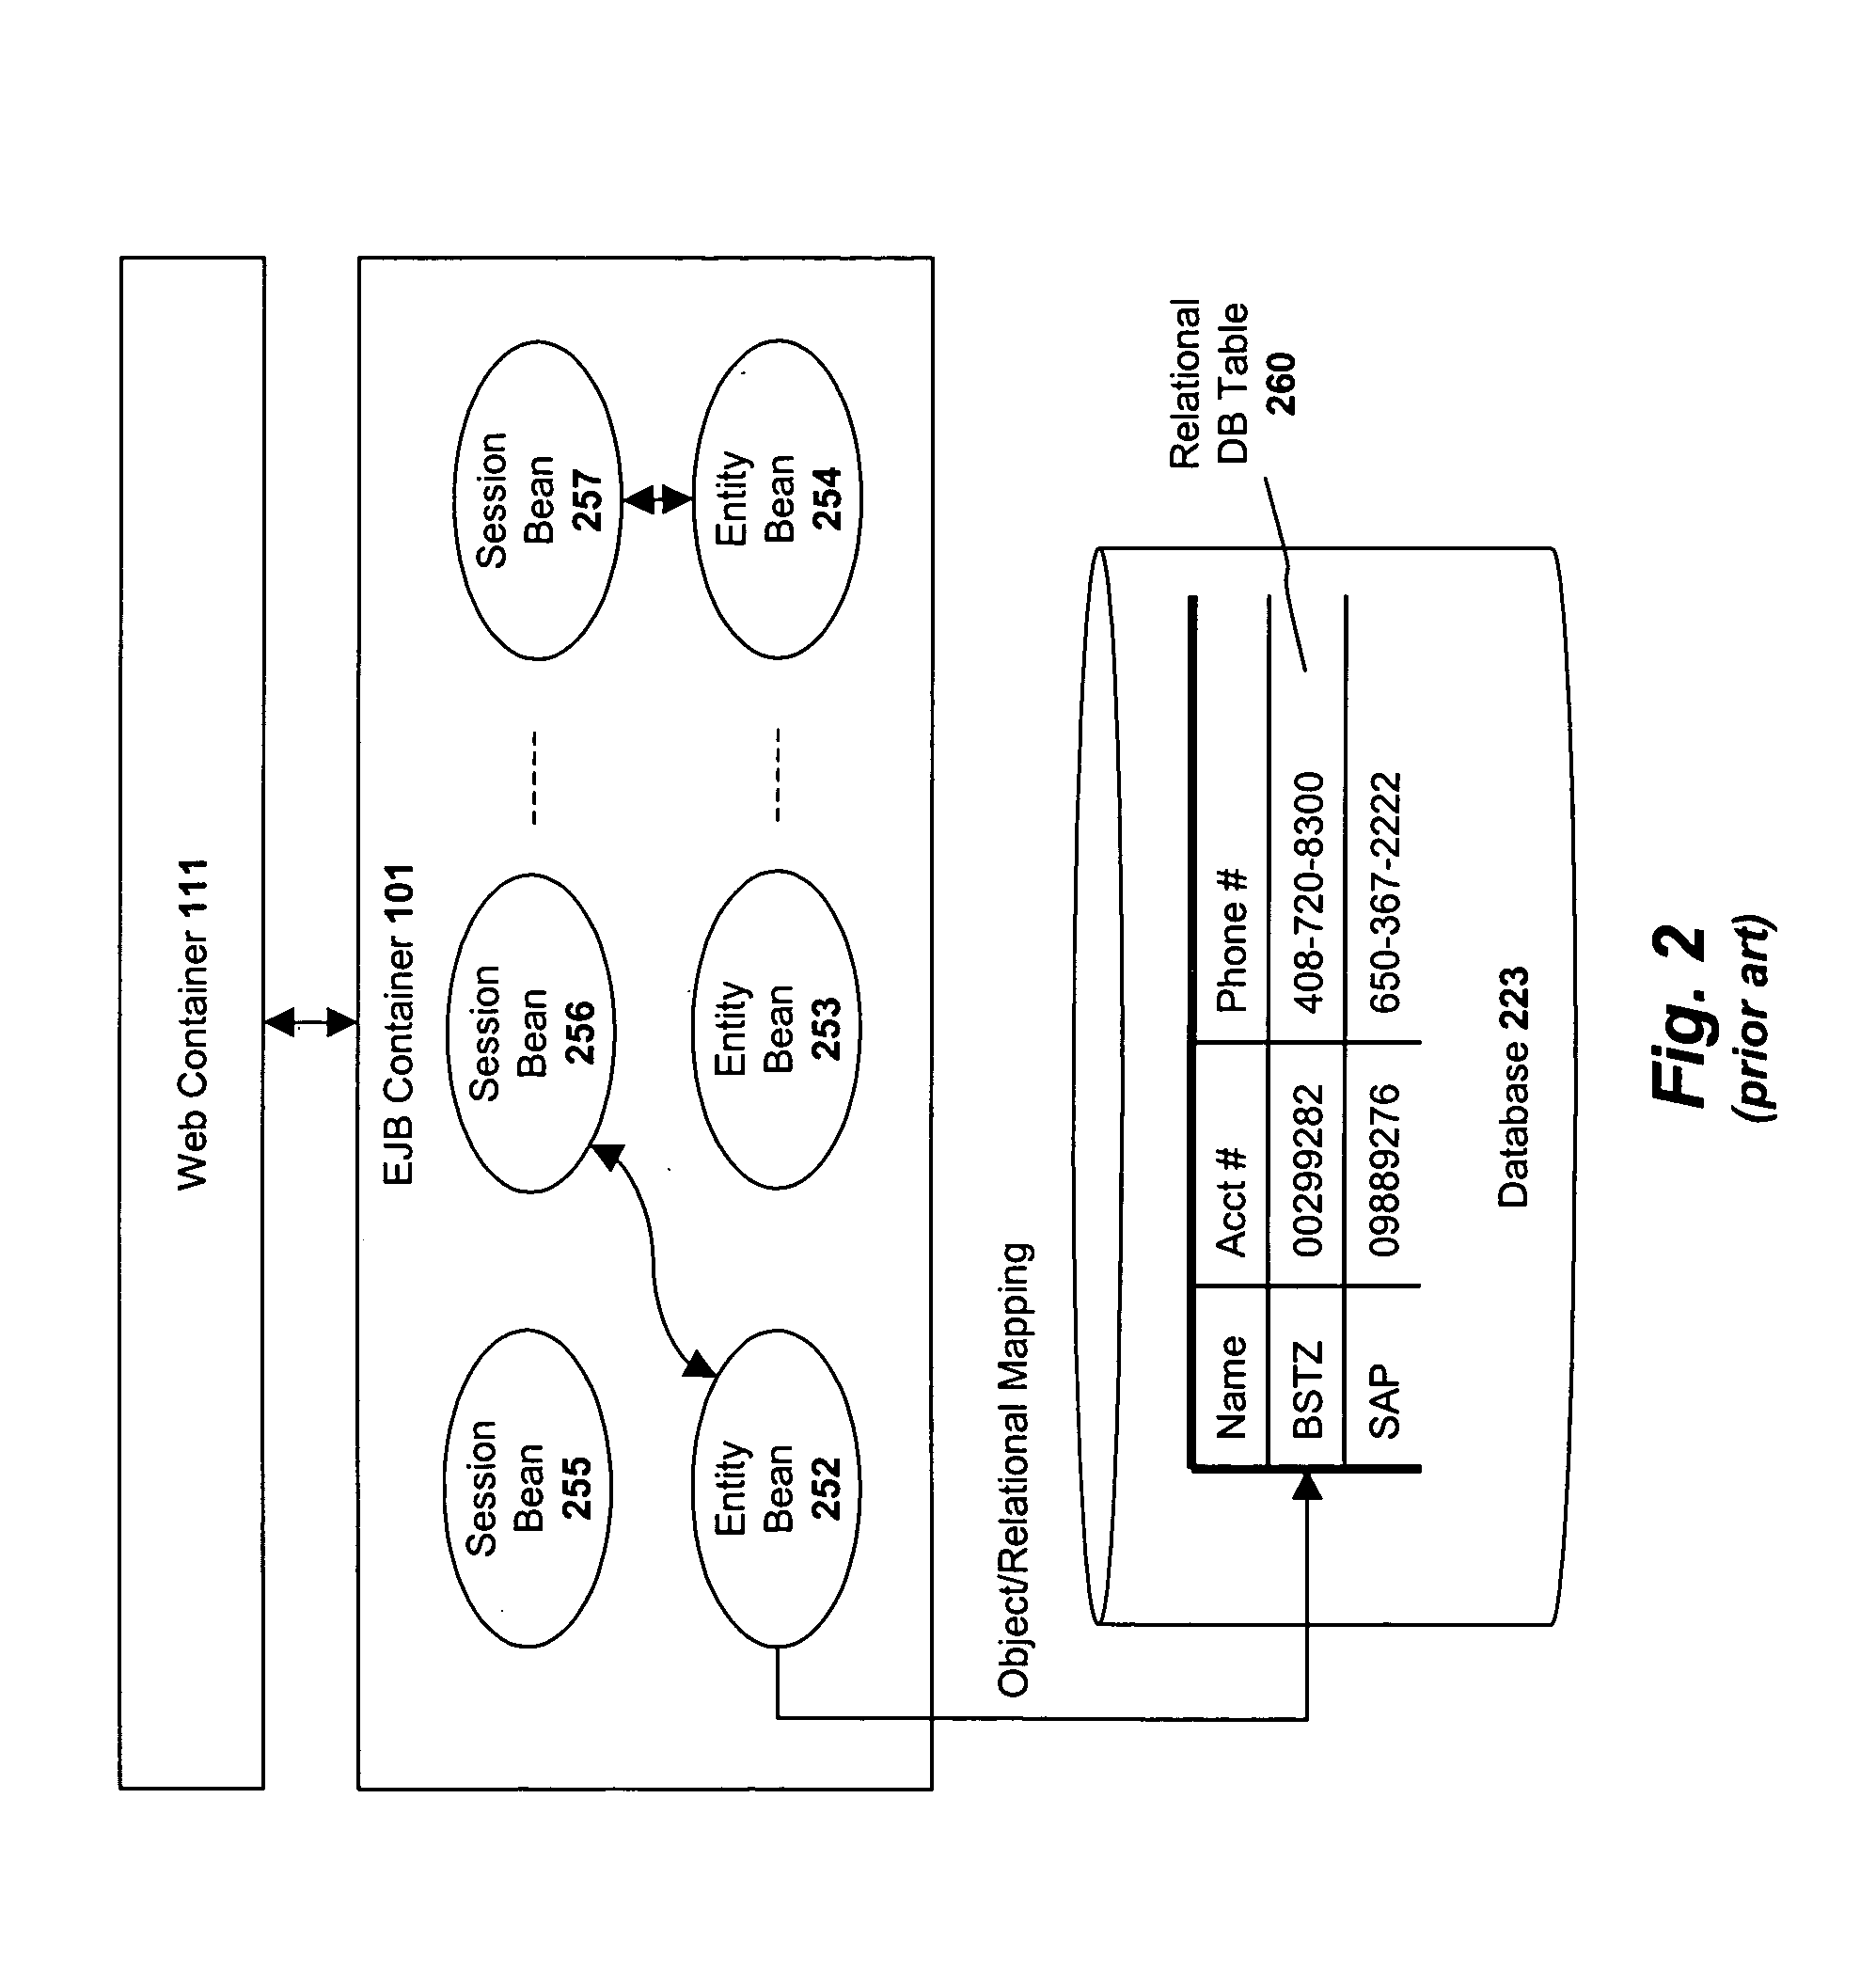 System and method for mapping object-oriented program code to a database layer